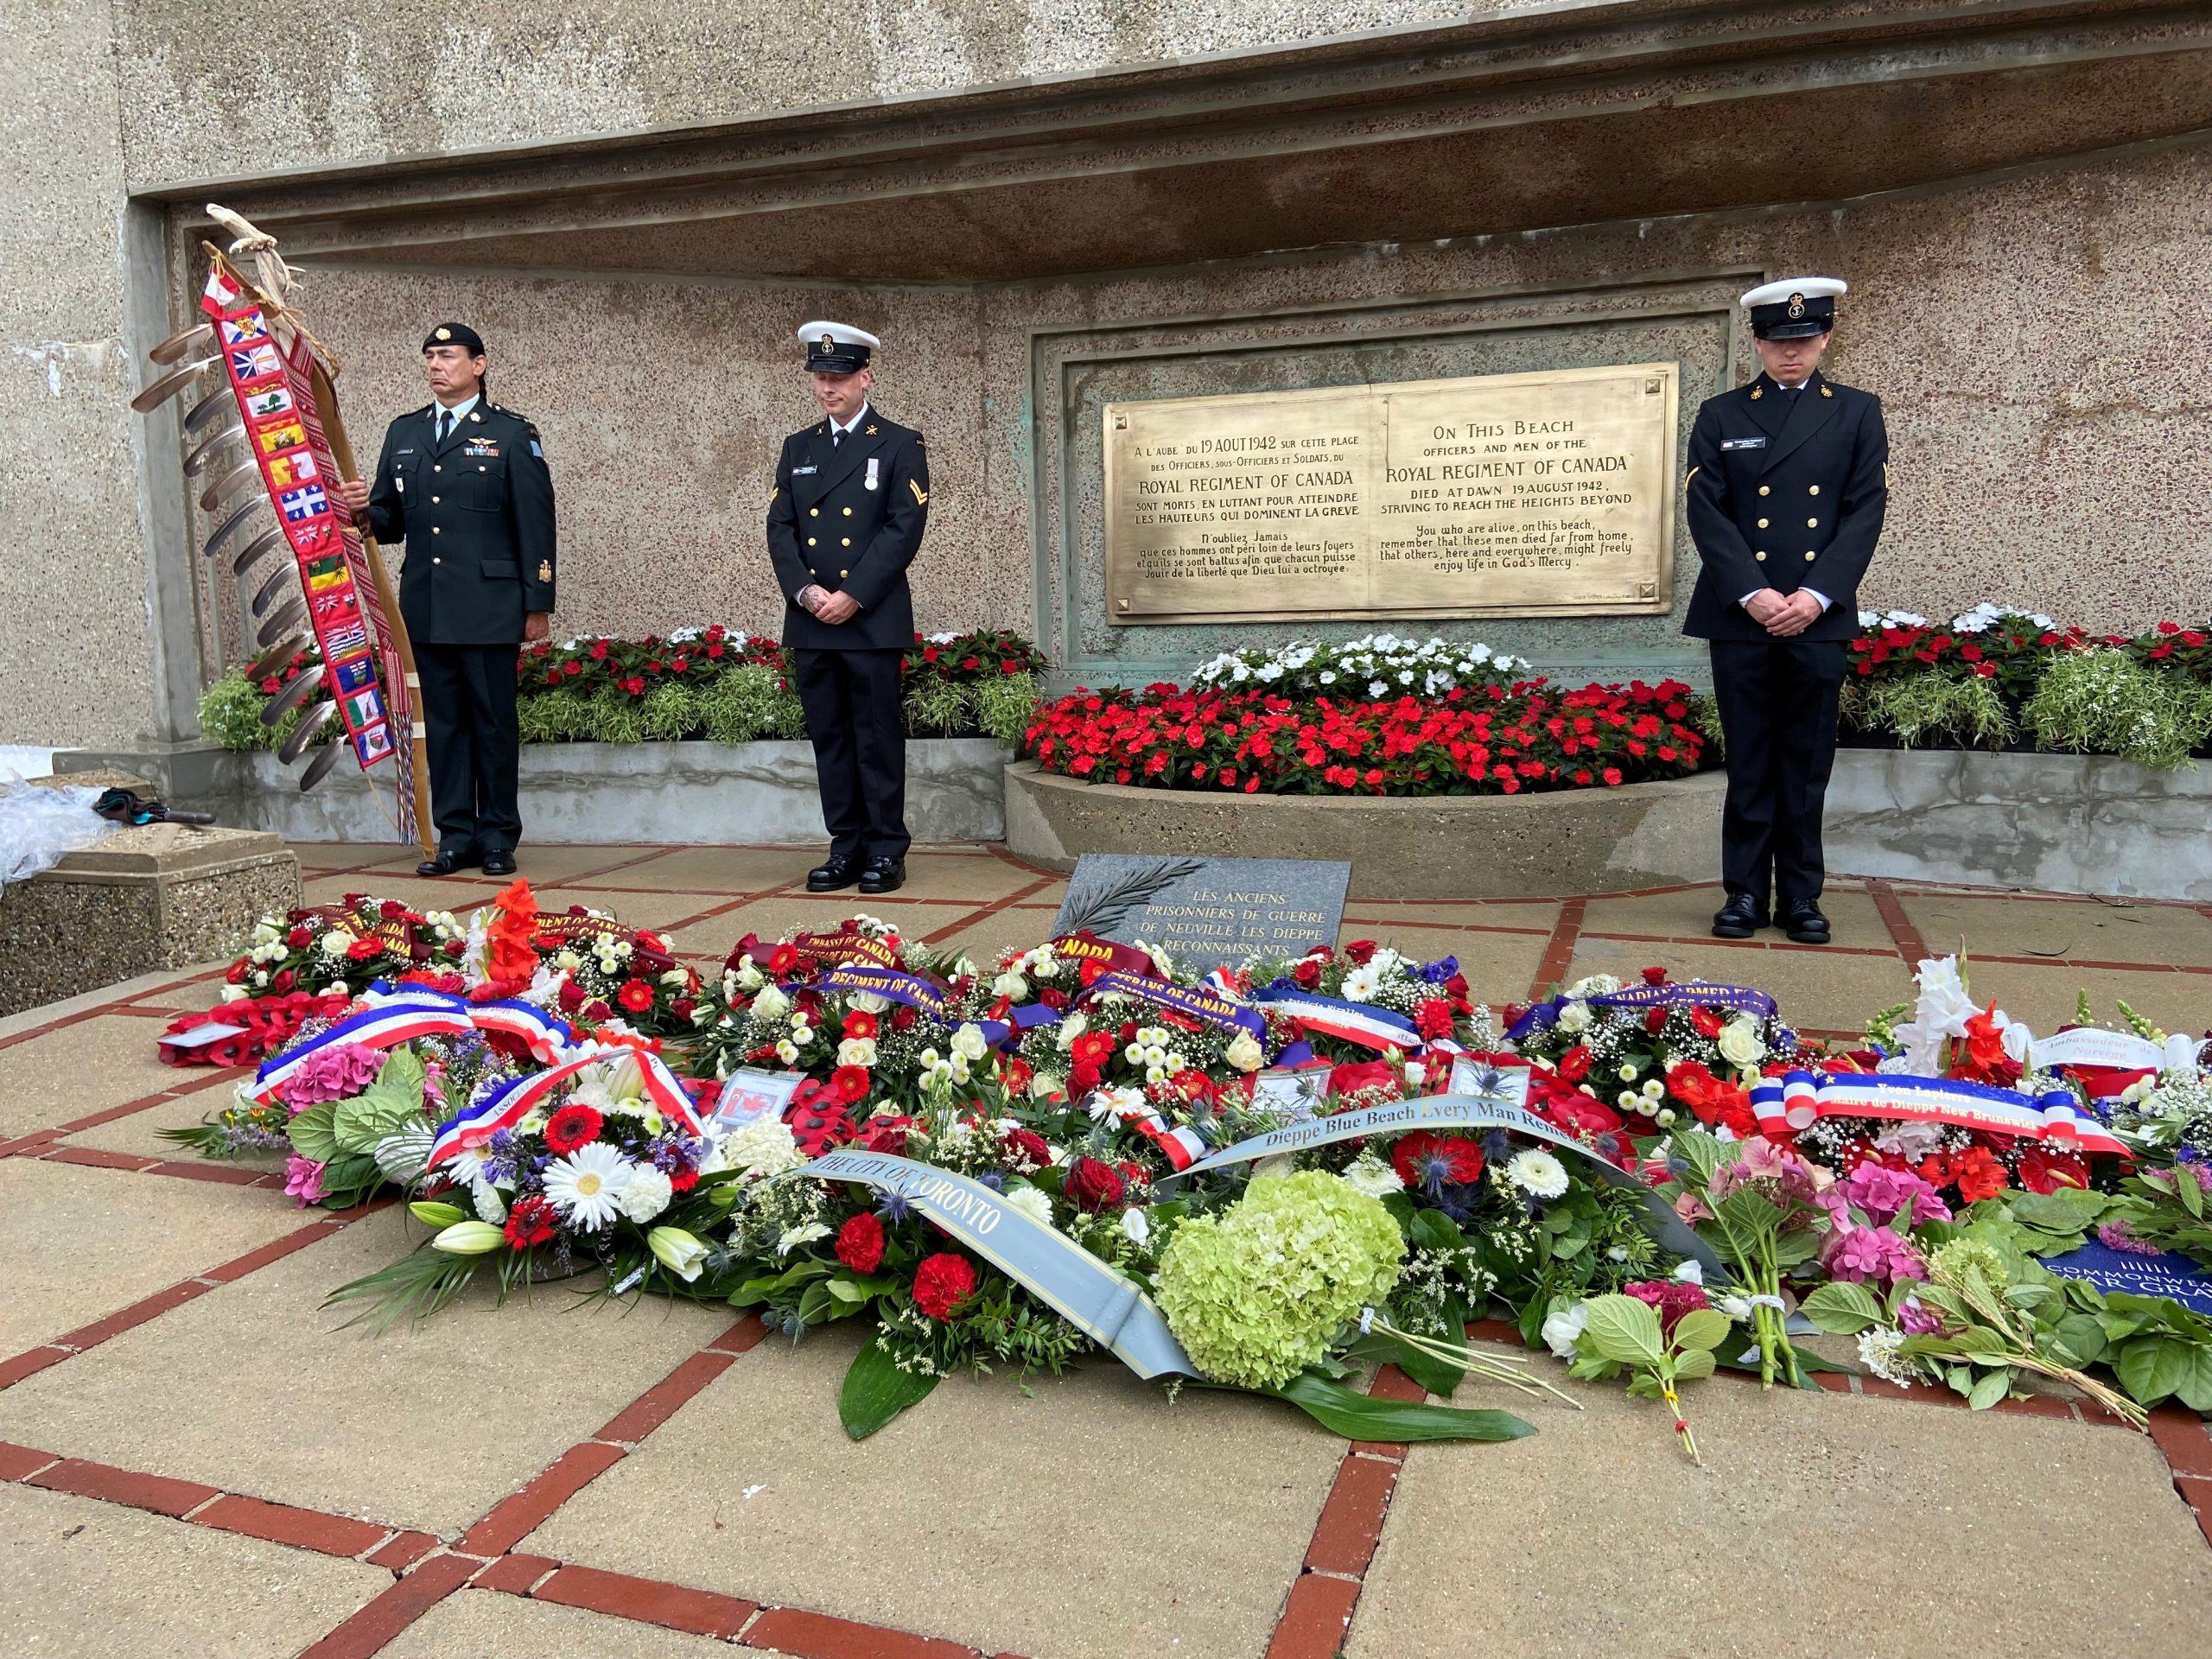 A group of wreaths, with the City of Toronto wreath in front, are seen in front of the Canada memorial in Dieppe, France.